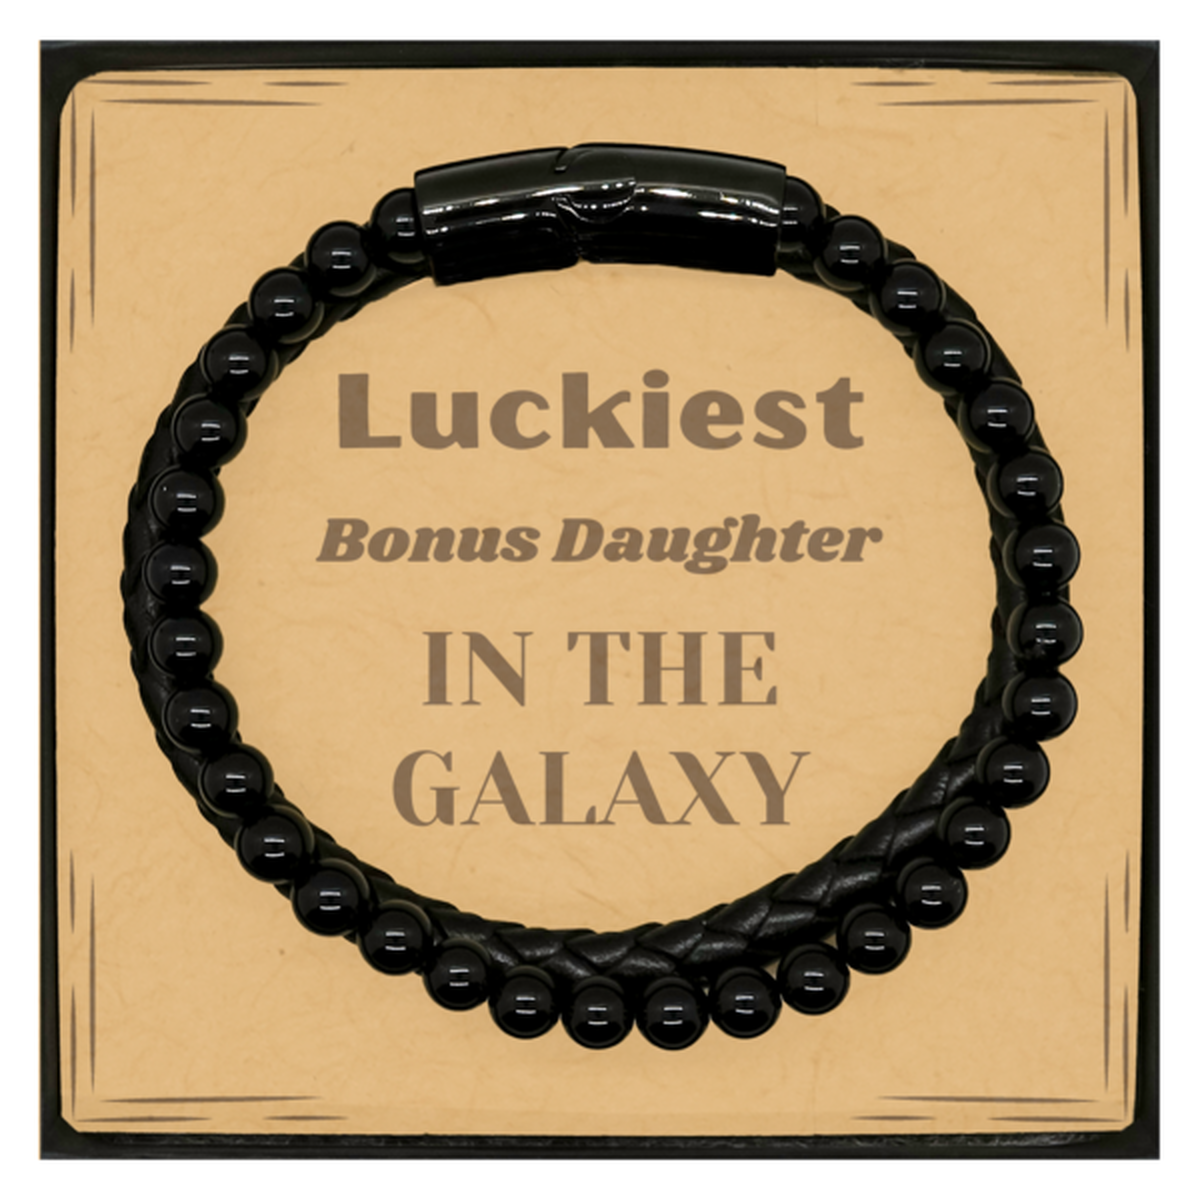 Luckiest Bonus Daughter in the Galaxy, To My Bonus Daughter Message Card Gifts, Christmas Bonus Daughter Stone Leather Bracelets Gifts, X-mas Birthday Unique Gifts For Bonus Daughter Men Women